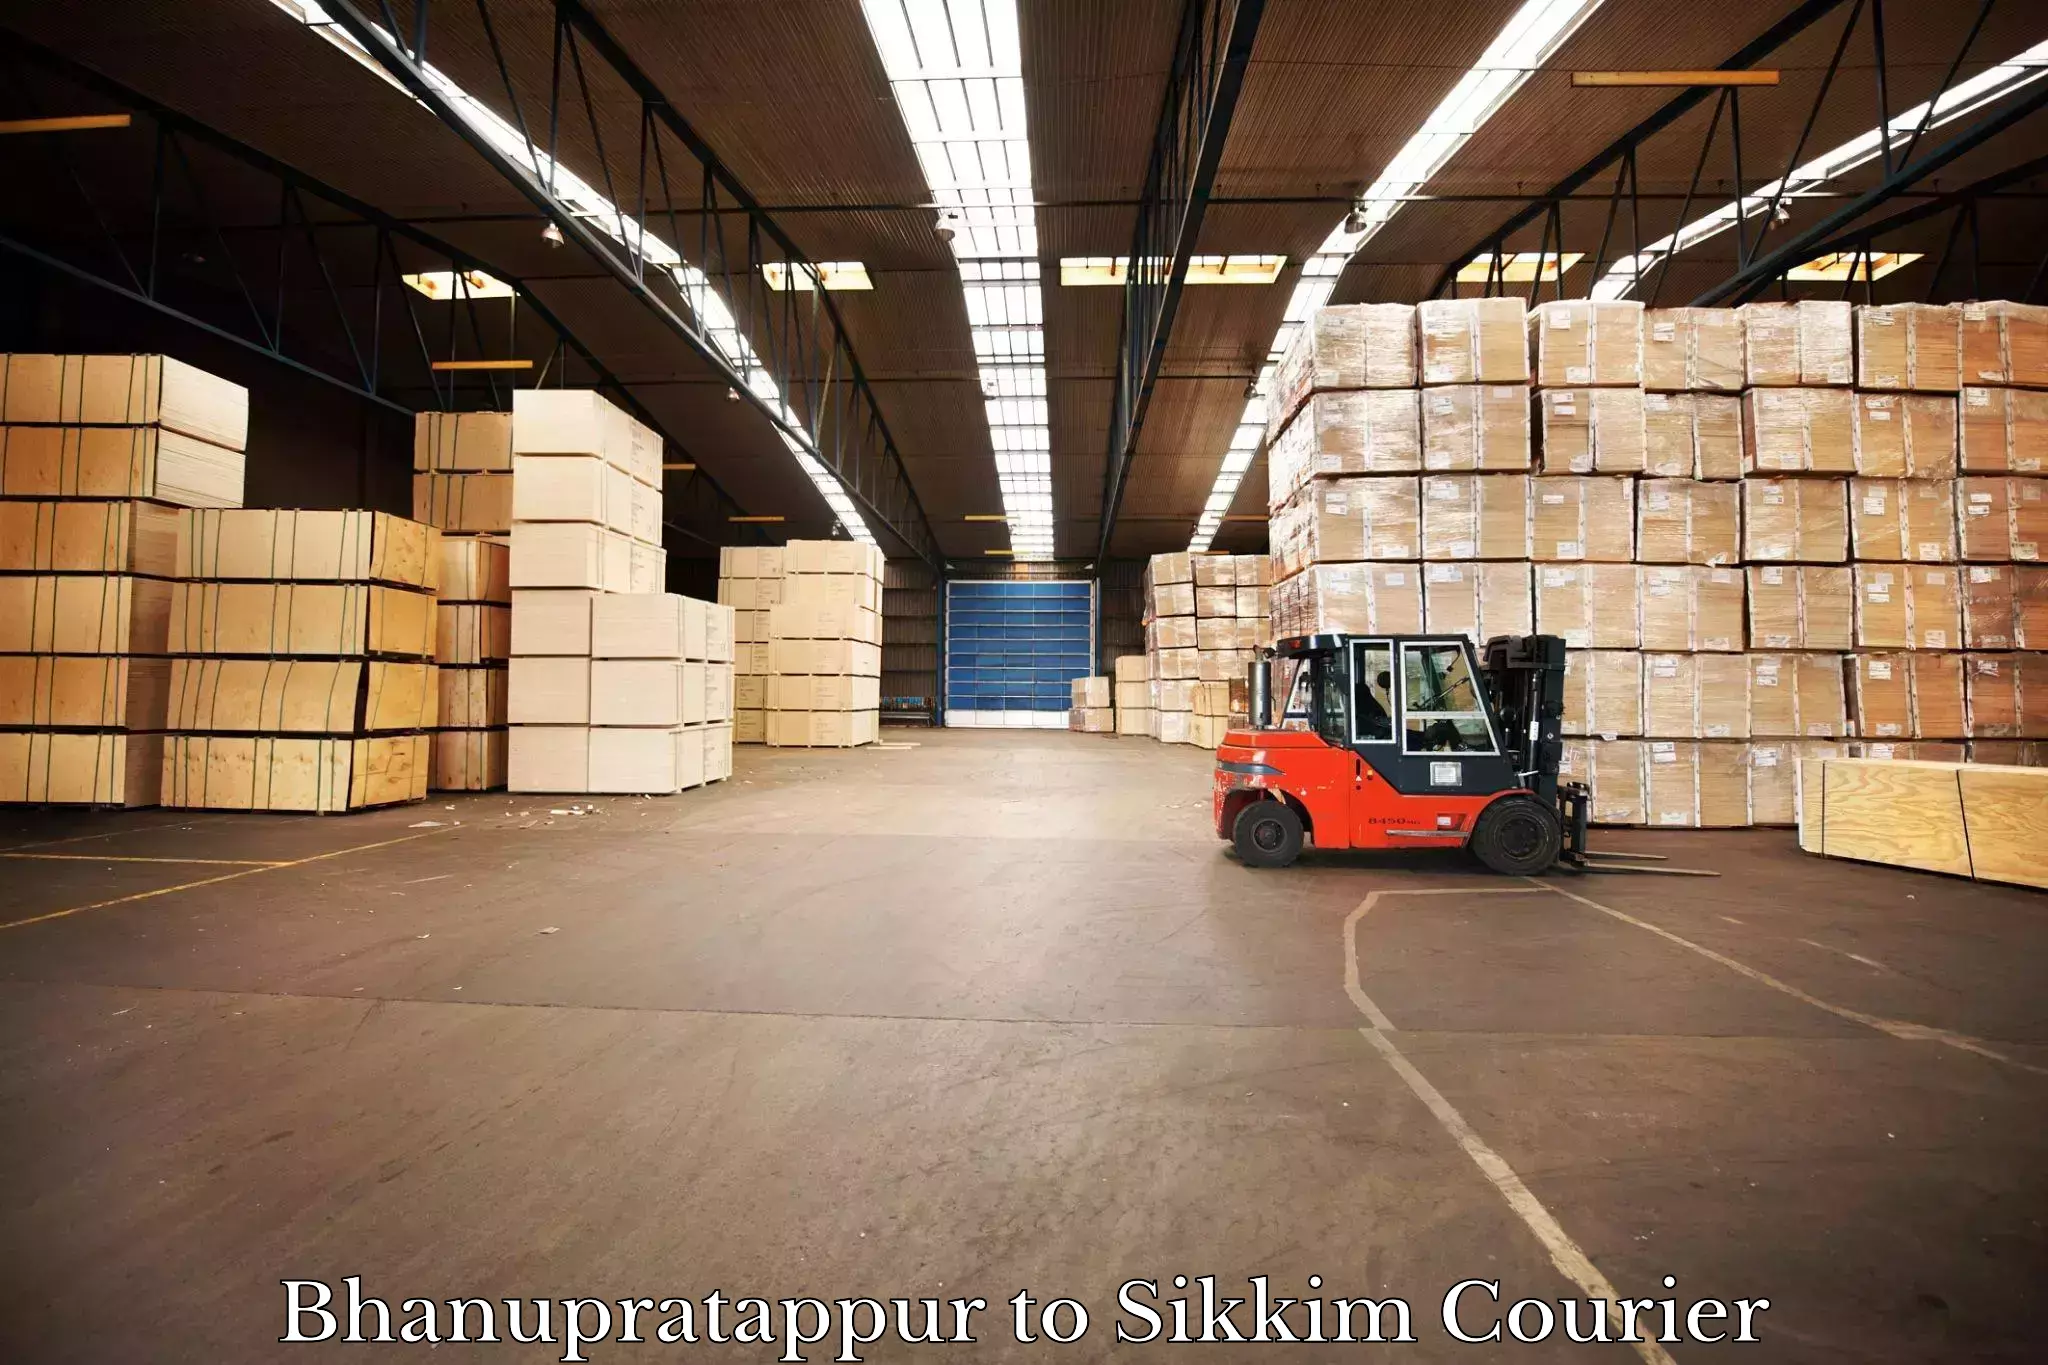 Subscription-based courier Bhanupratappur to Sikkim